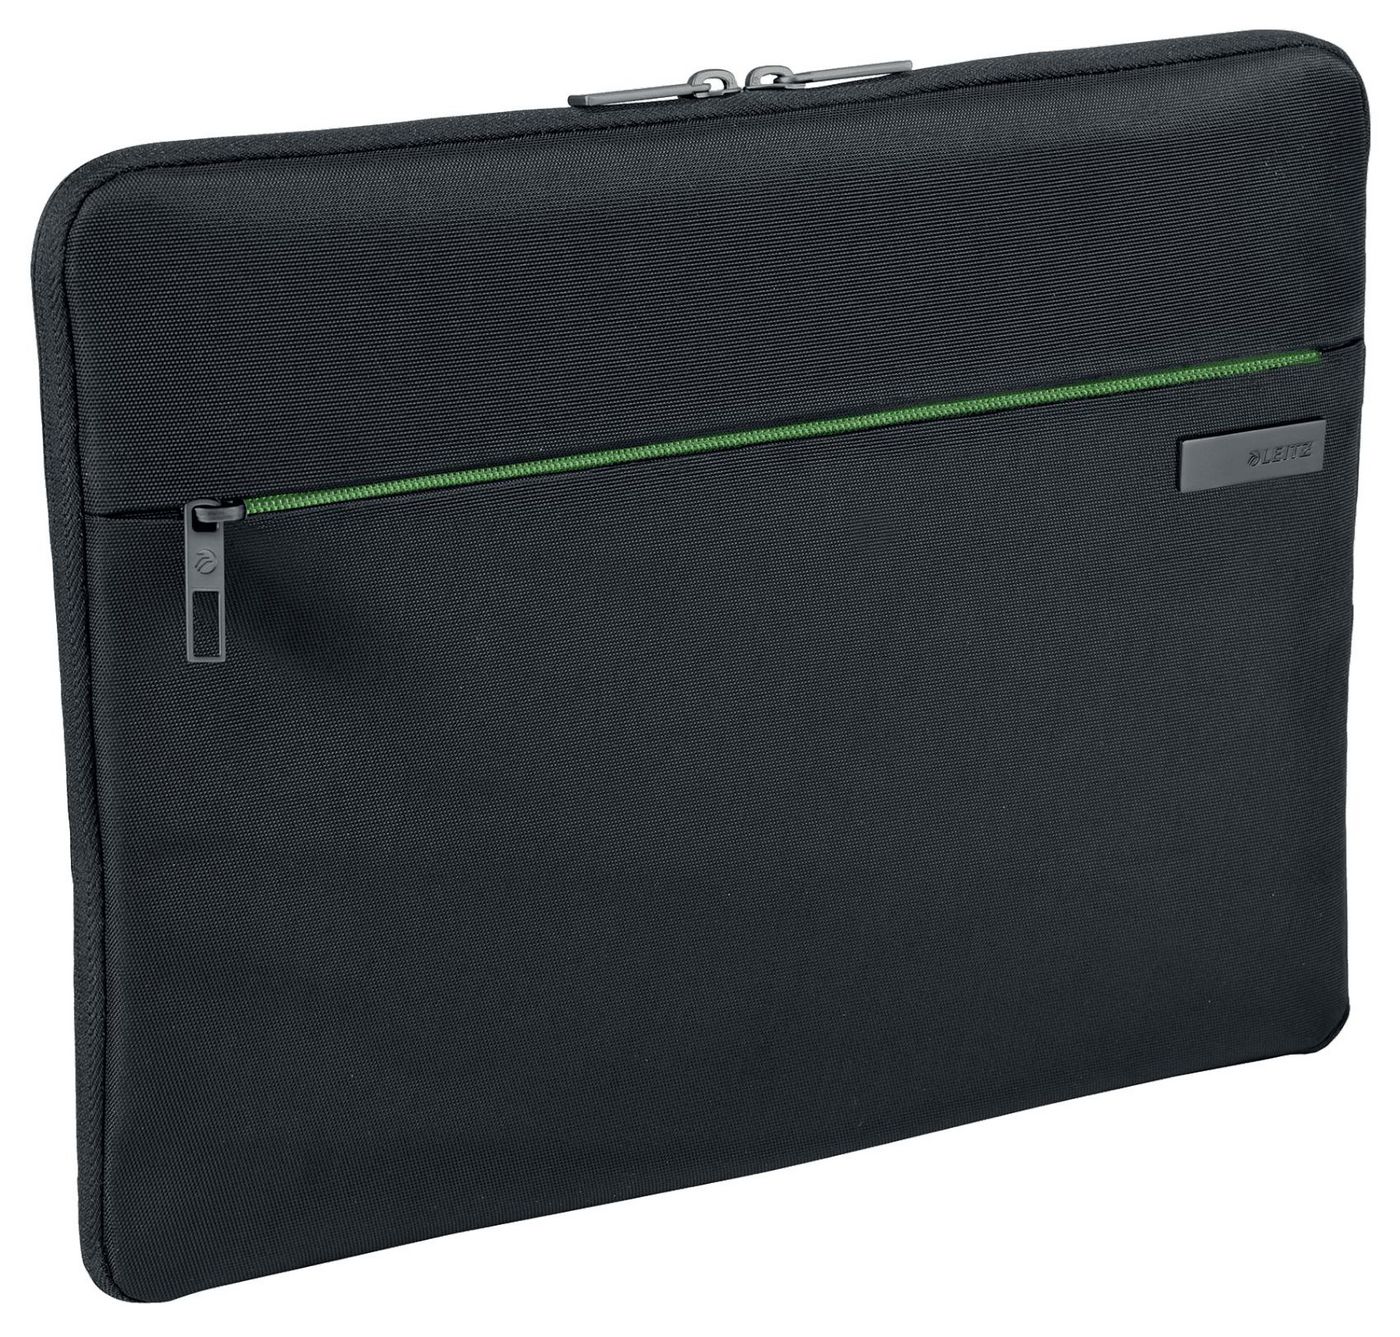 Sleeve for 13.3" laptop